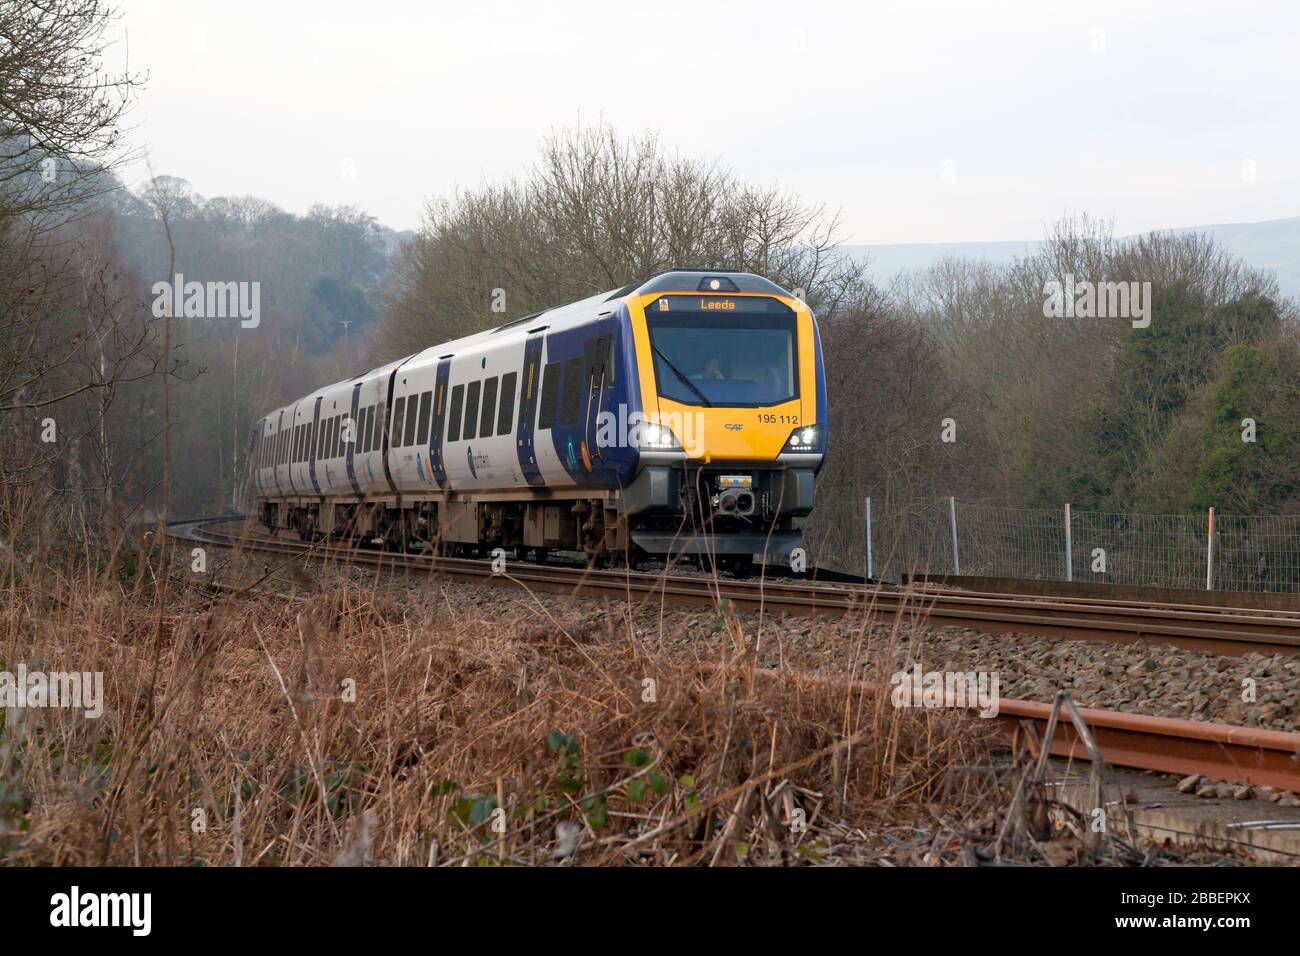 Northern Rail class 195 diesel multiple unit on the Caldervale Line, Luddenden Foot, West Yorkshire Stock Photo